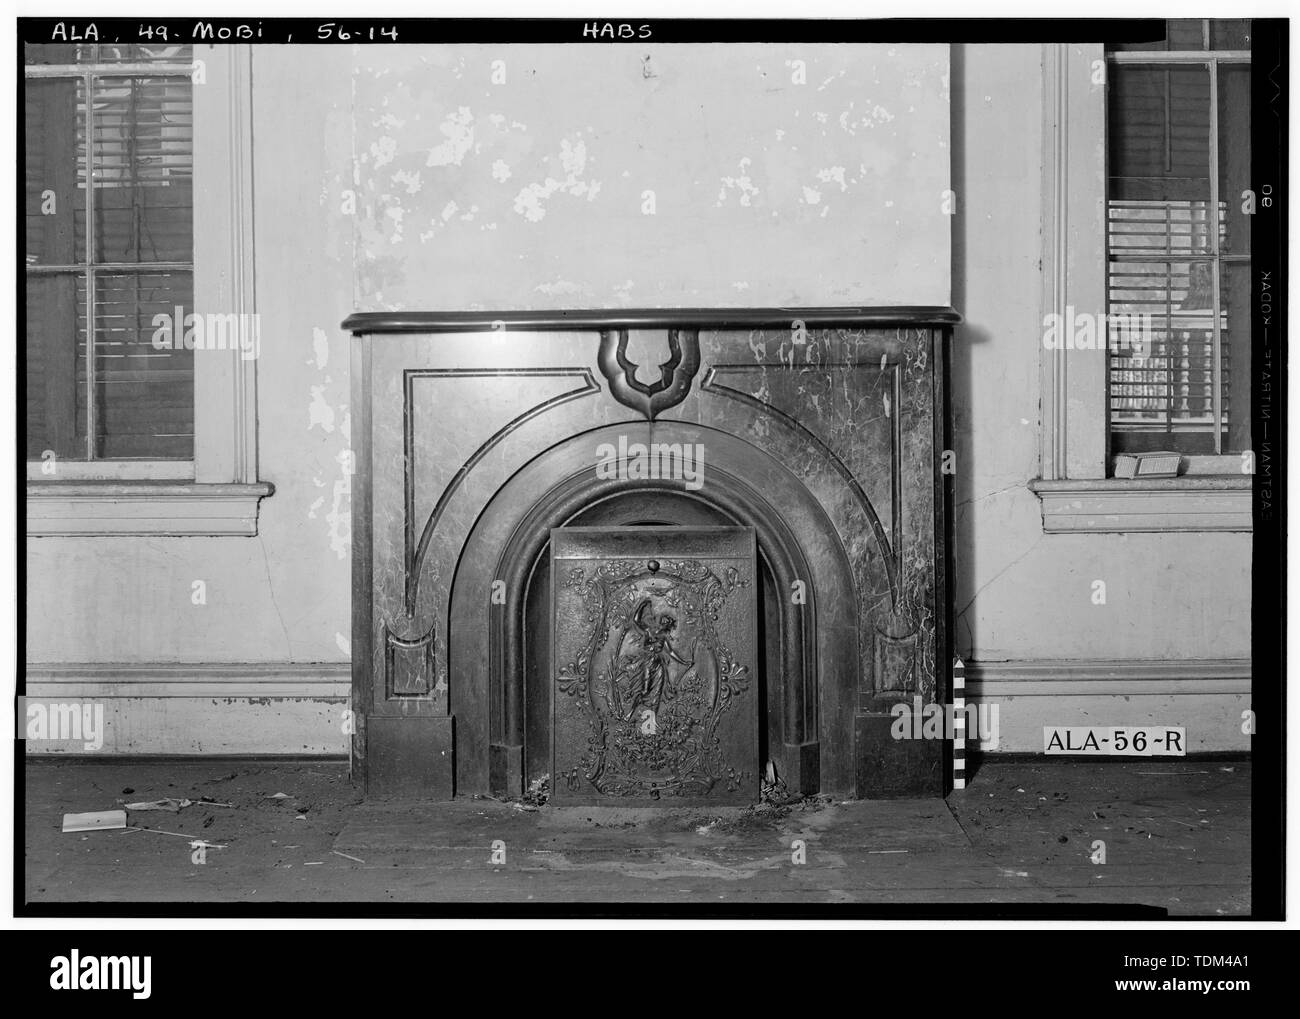 Historic American Buildings Survey E. W. Russell, Photographer, March 24, 1936 PARLOR MANTEL (BLACK MARBLE) - Horta-Semmes House and Fence, 802 Government Street, Mobile, Mobile County, AL Stock Photo